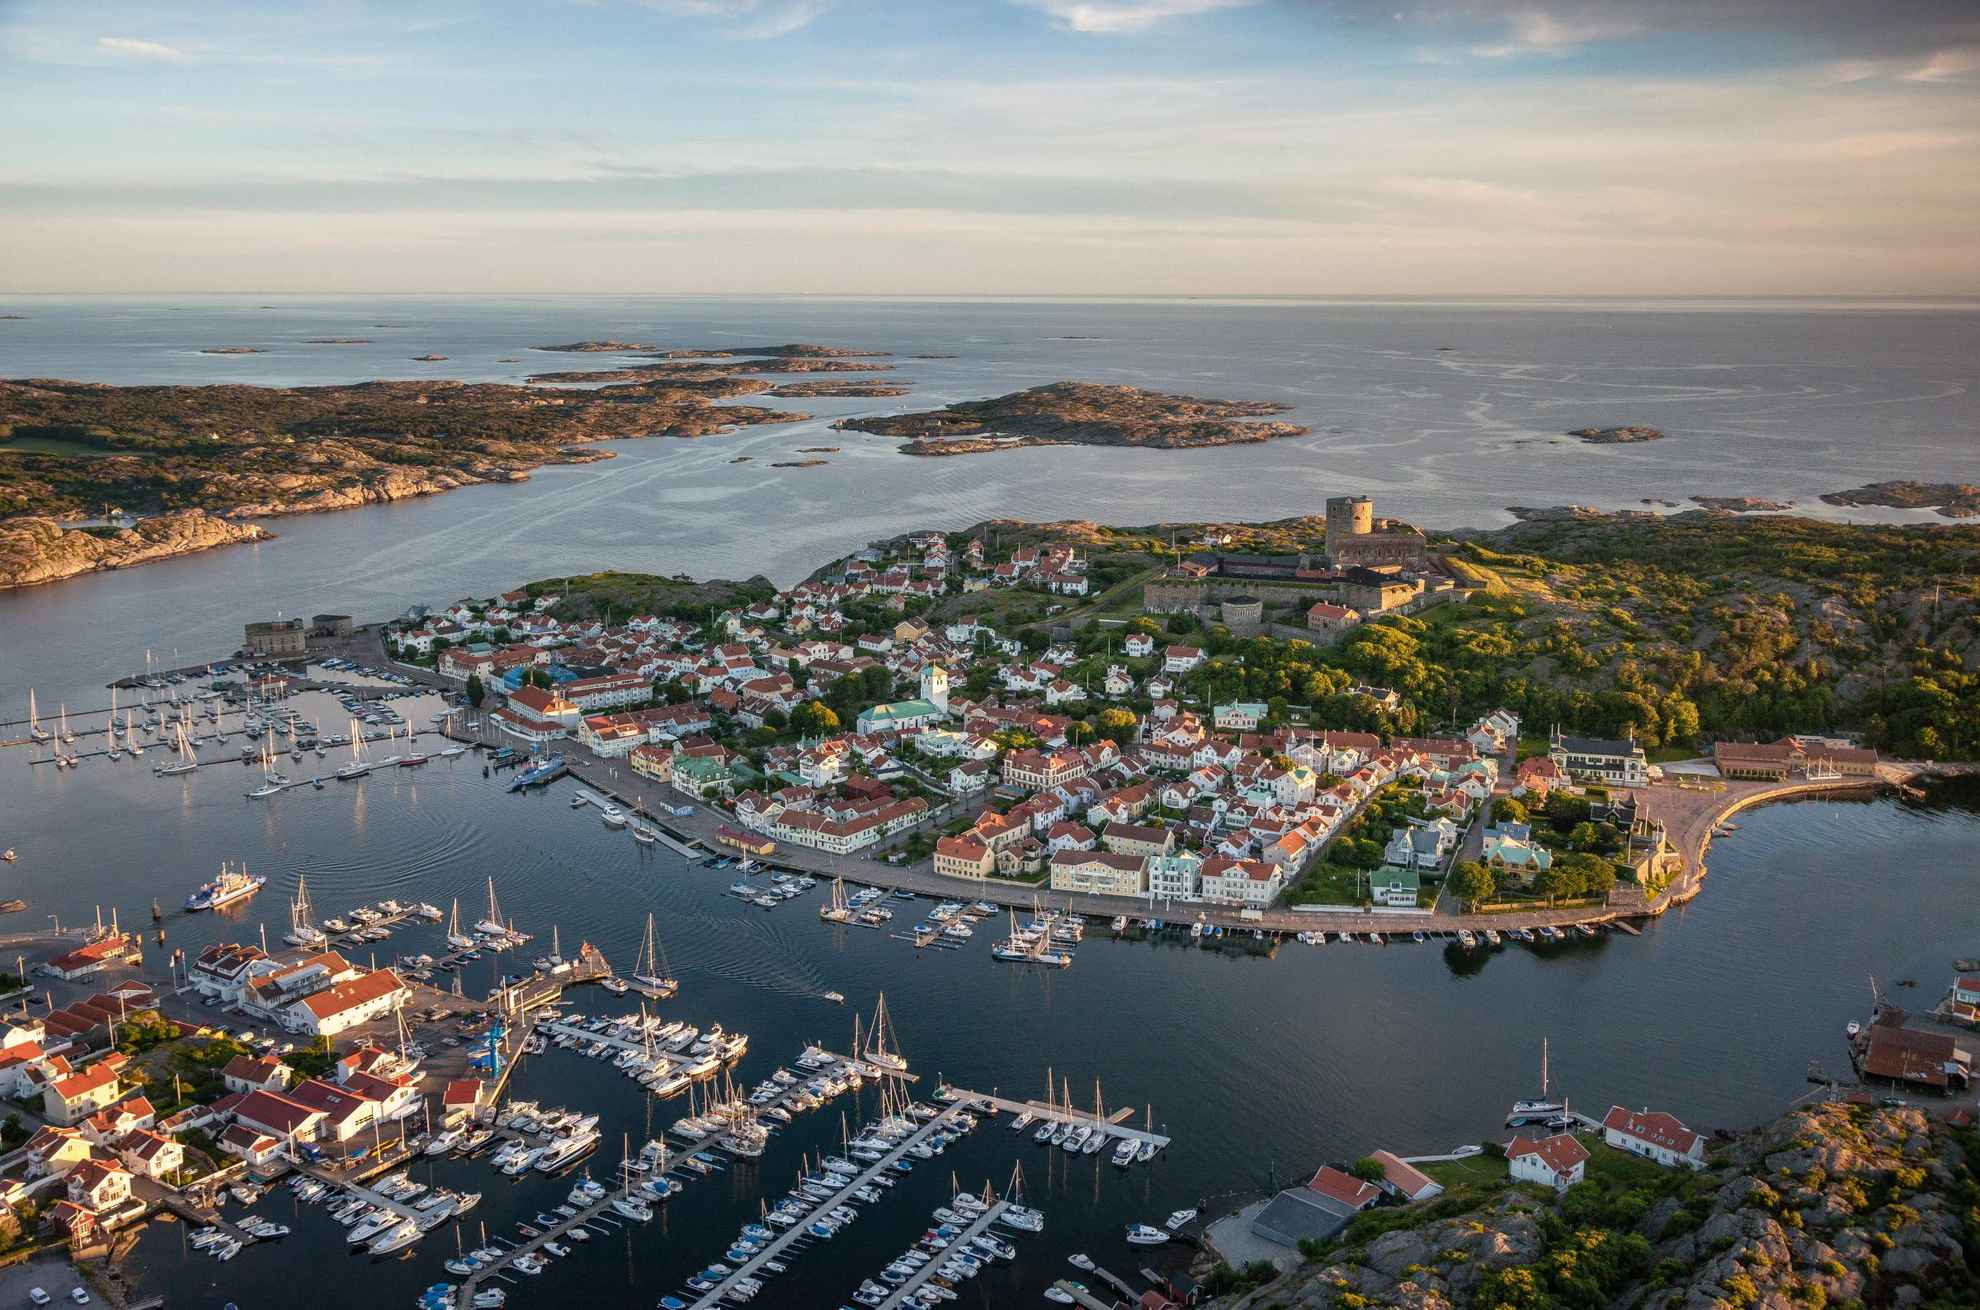 Aerial view of the small town Marstrand with a lot of sailing boats in the front, the fortress on the island in the middle and the archipelago in the background.